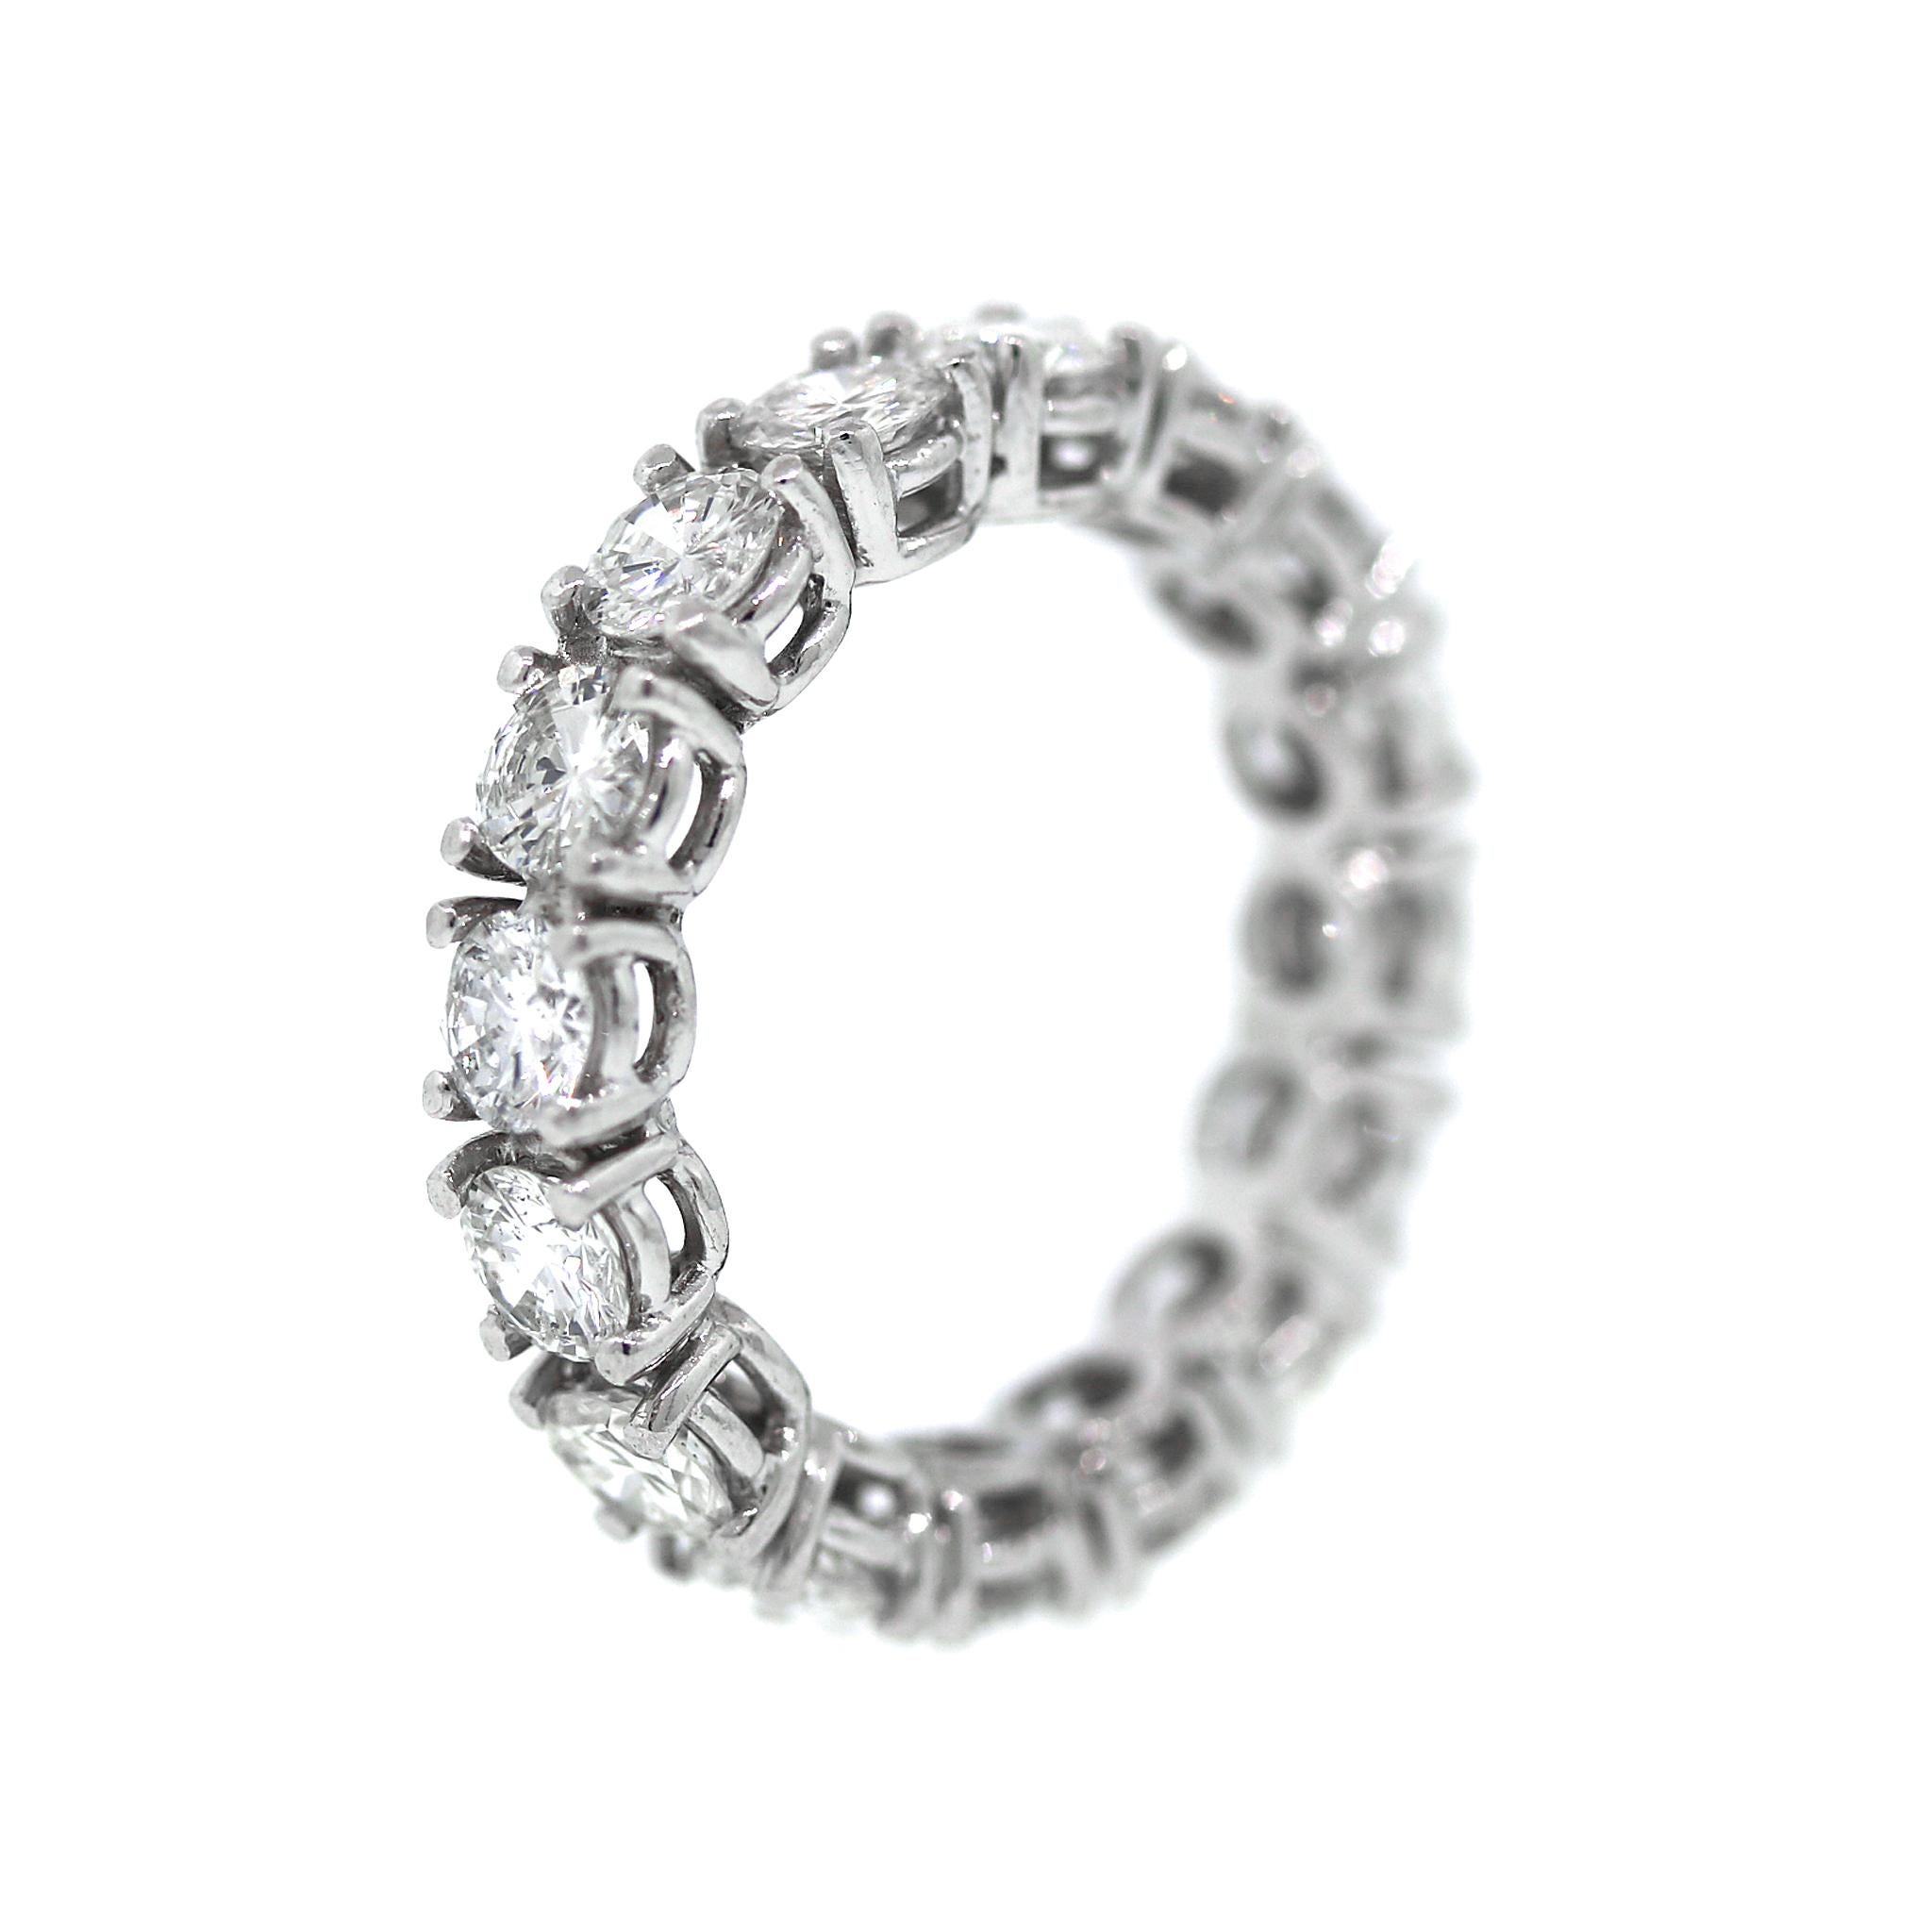 14 kt White Gold
Diamond: 3.50 ct twd
Color: G-H
Clarity: SI
Ring Size: 7